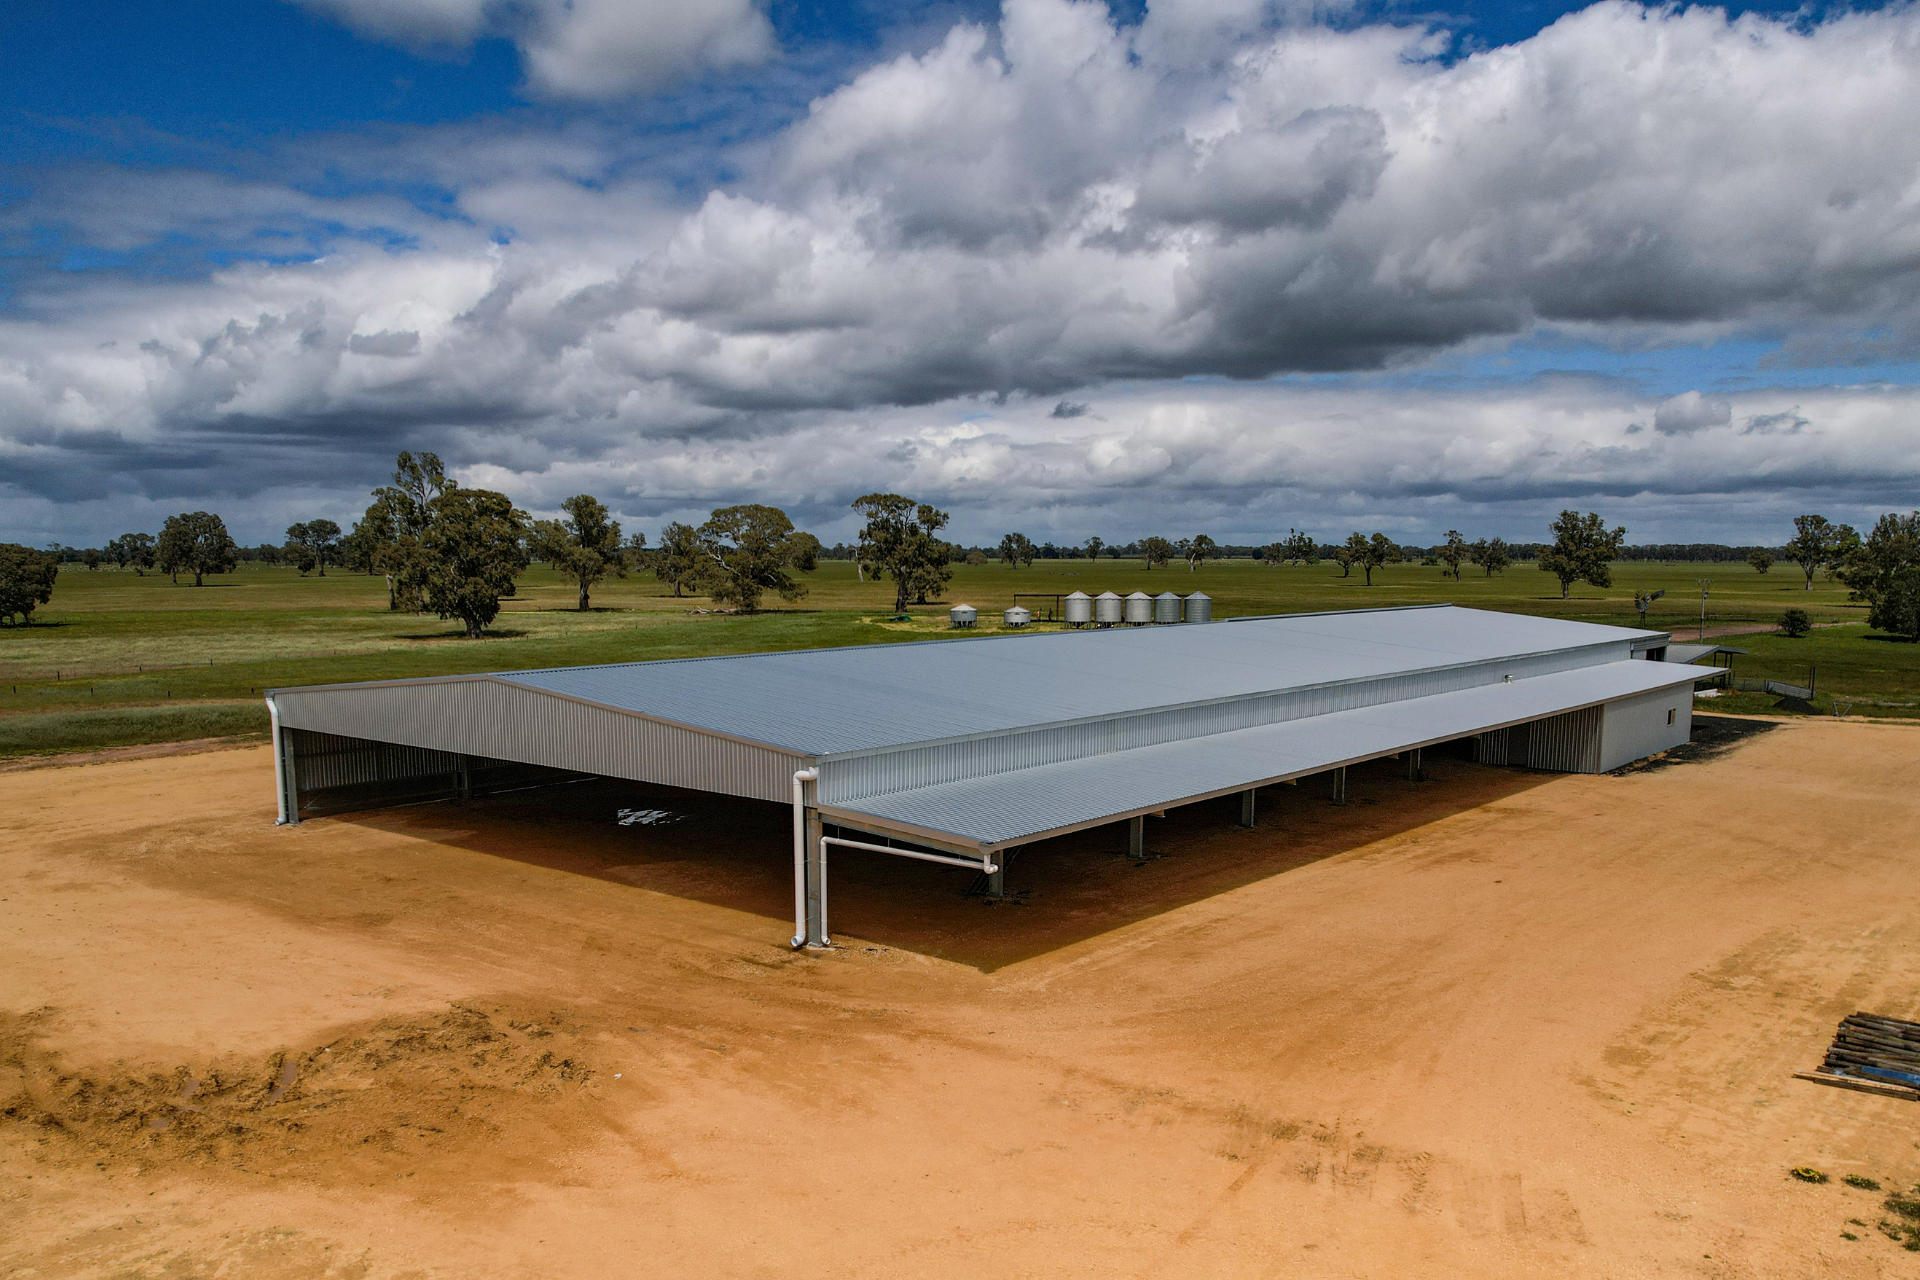 A 80m x 30m x 5.2m shearing shed complex with 6 metre canopy at Apsley VIC